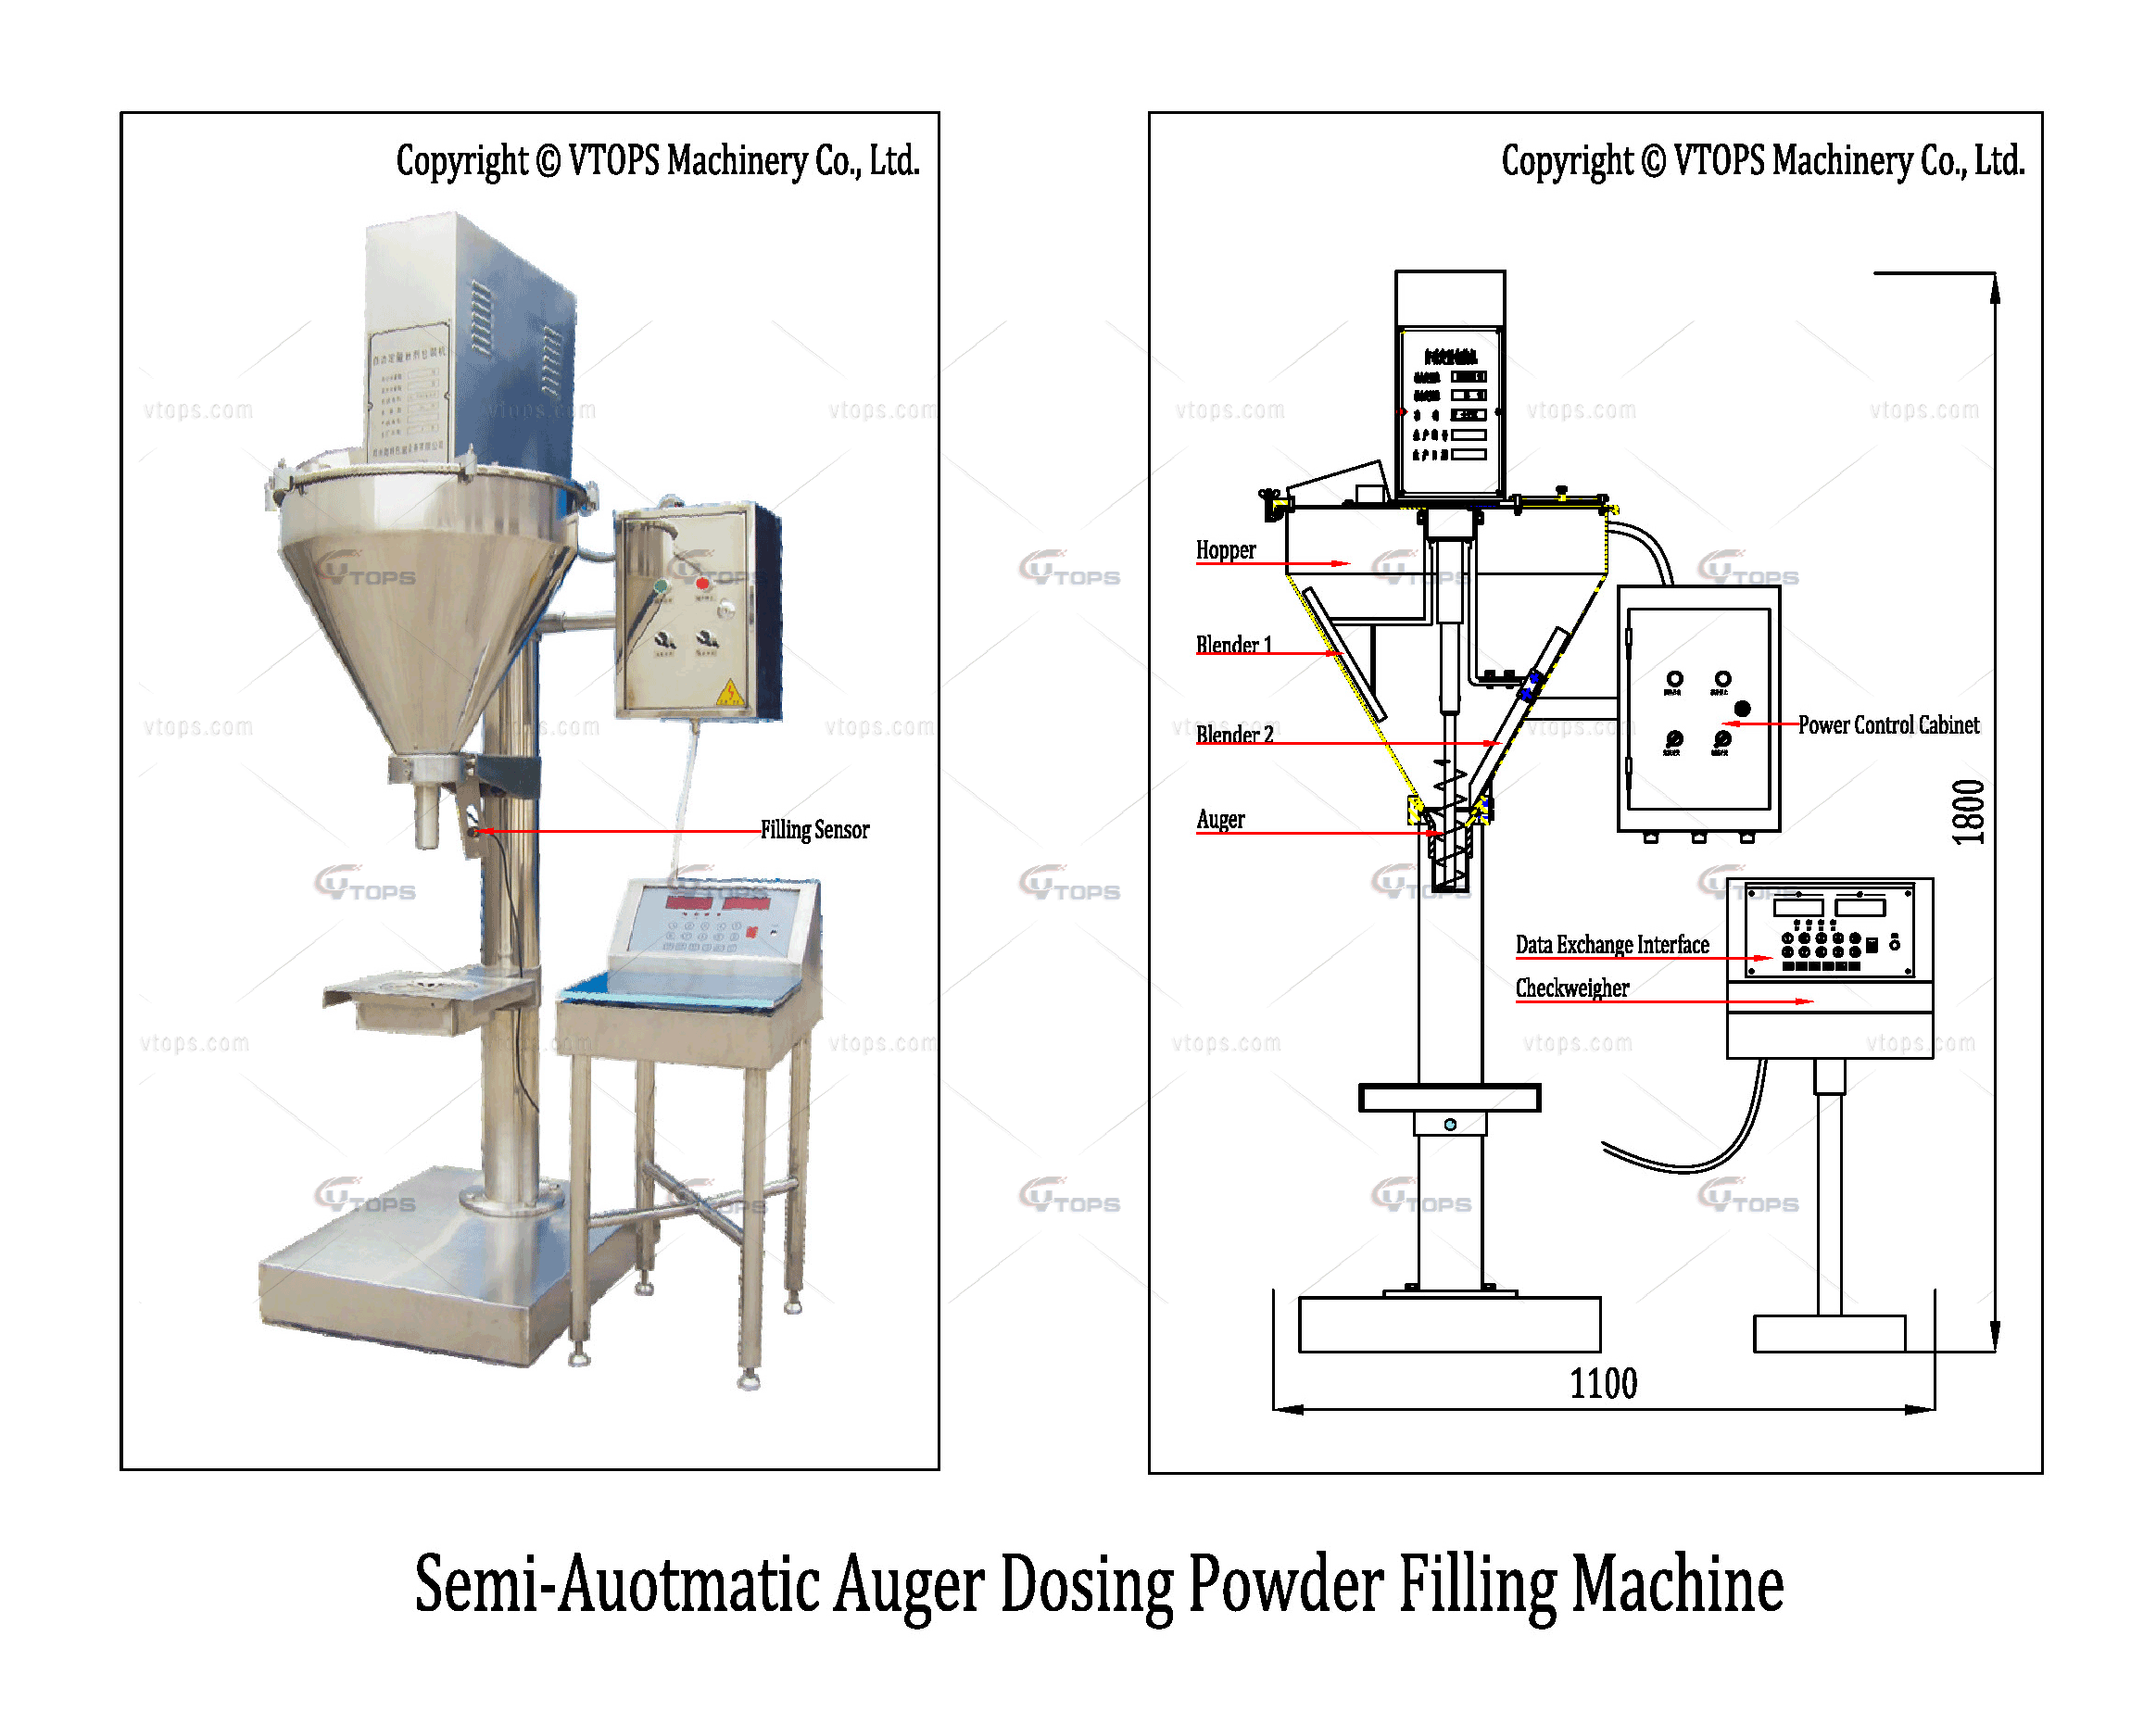 CAD Design Drawing of Semi-Automatic Auger Dosing Powder Filling Machine